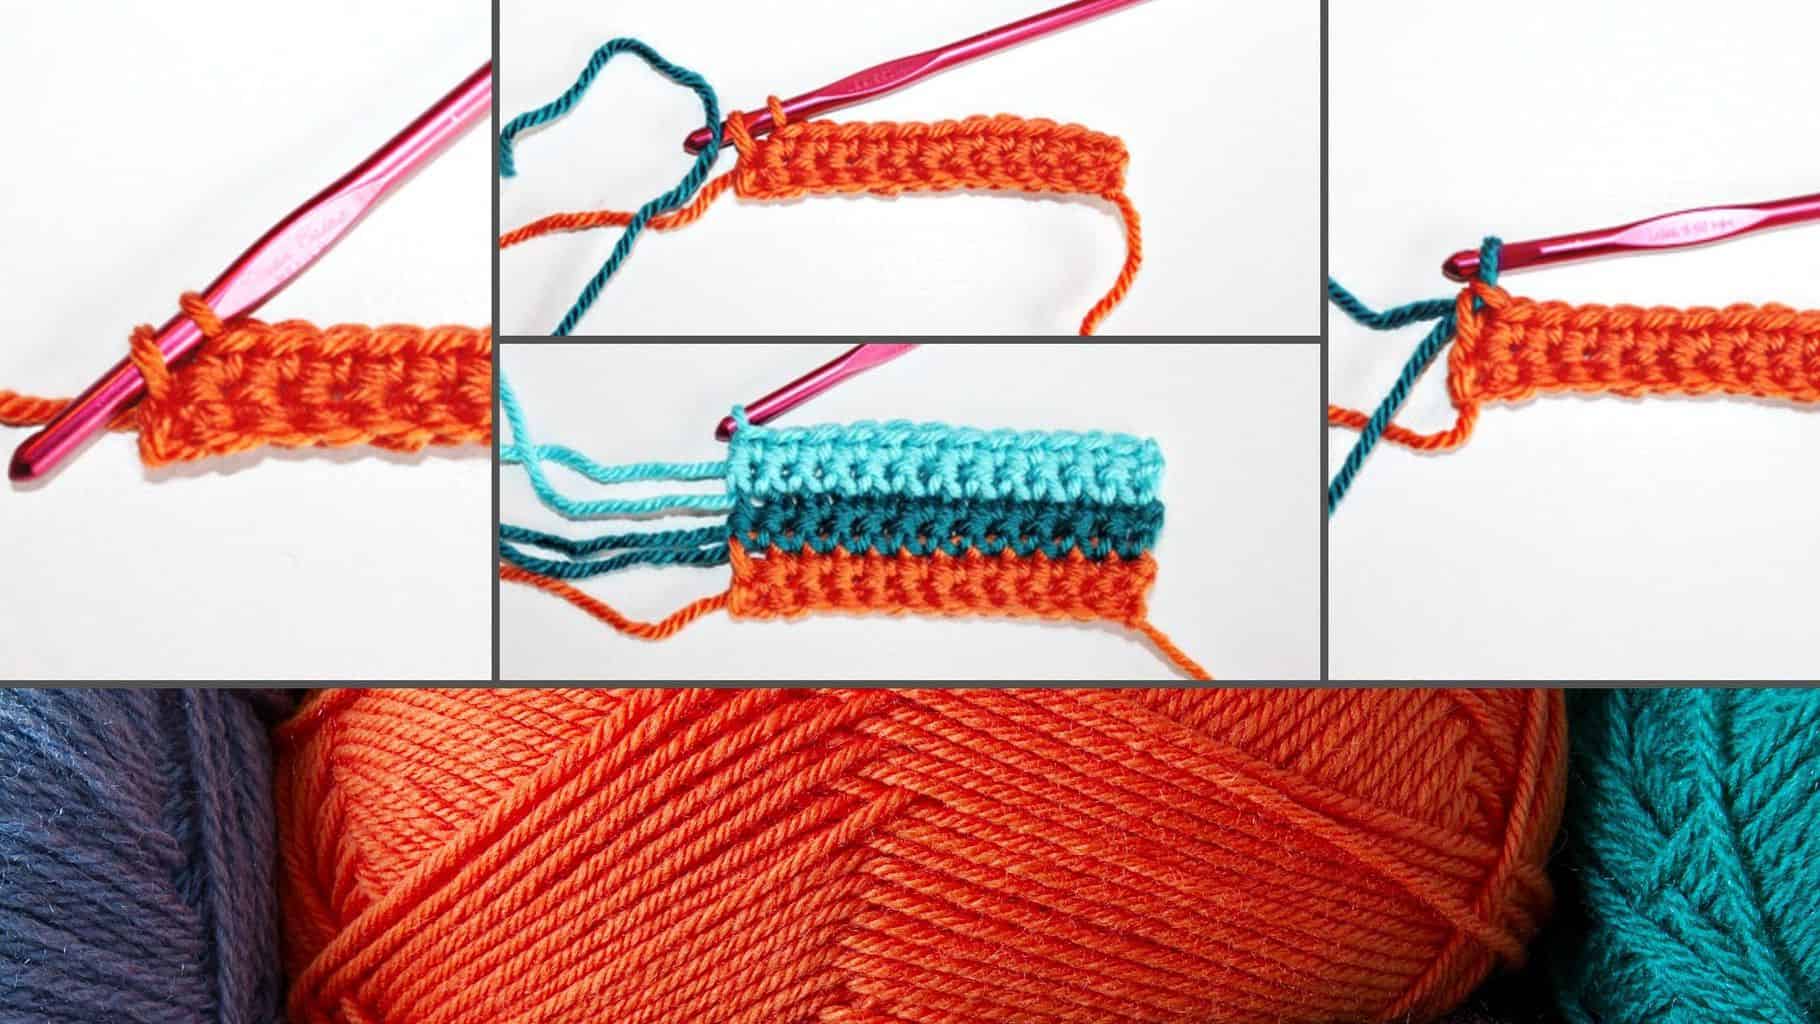 How to Change Yarn: 10 Steps (with Pictures) - wikiHow